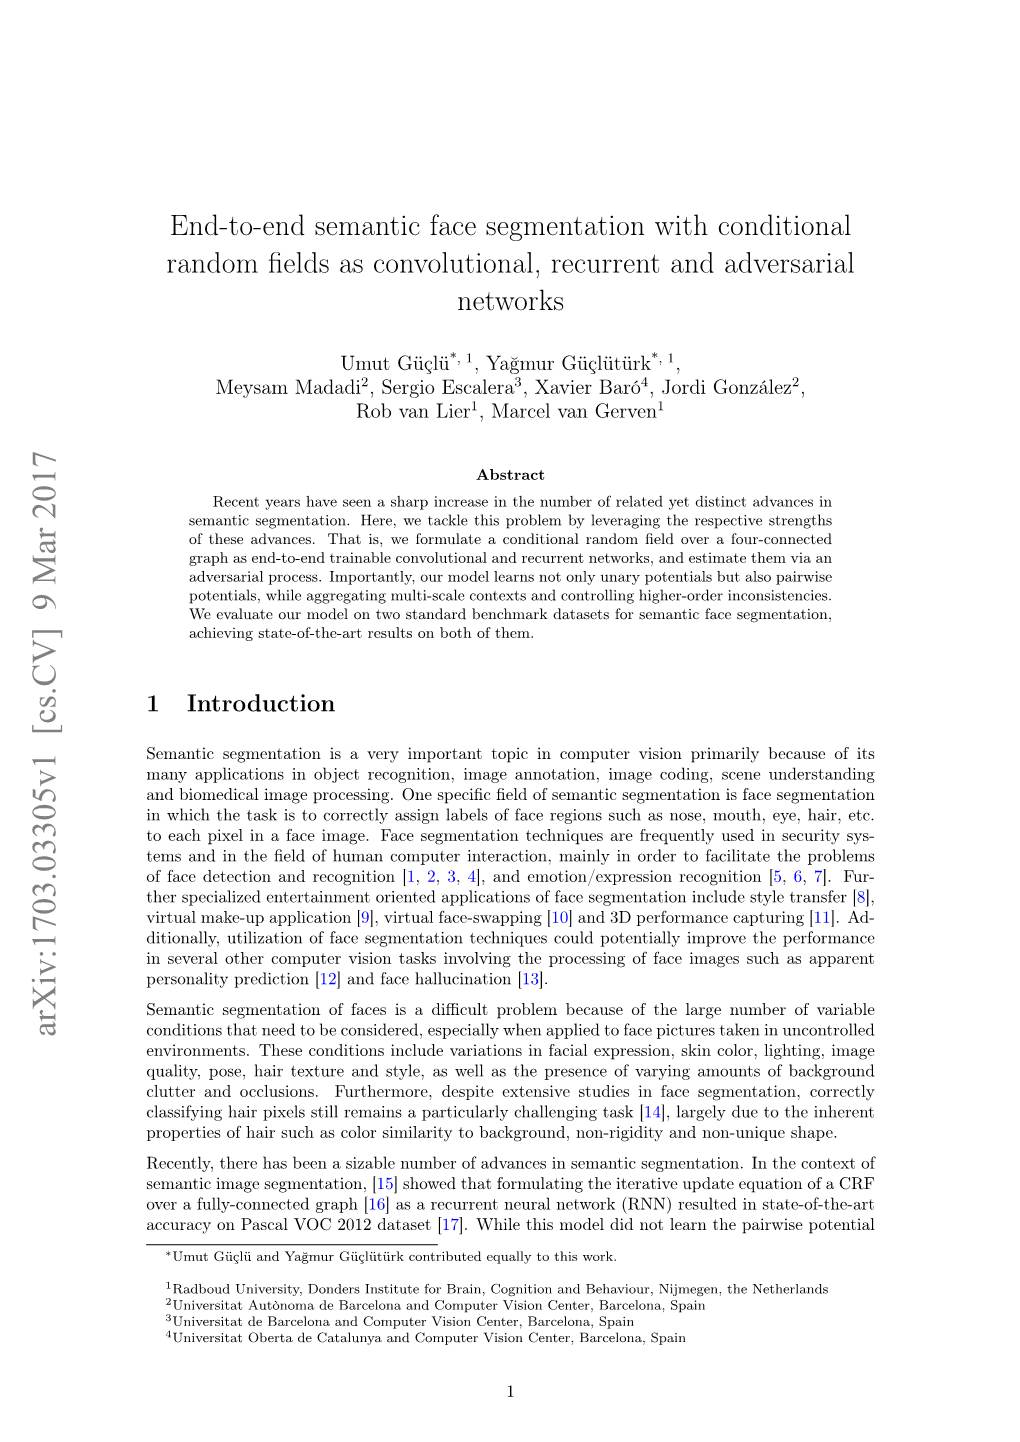 End-To-End Semantic Face Segmentation with Conditional Random ﬁelds As Convolutional, Recurrent and Adversarial Networks